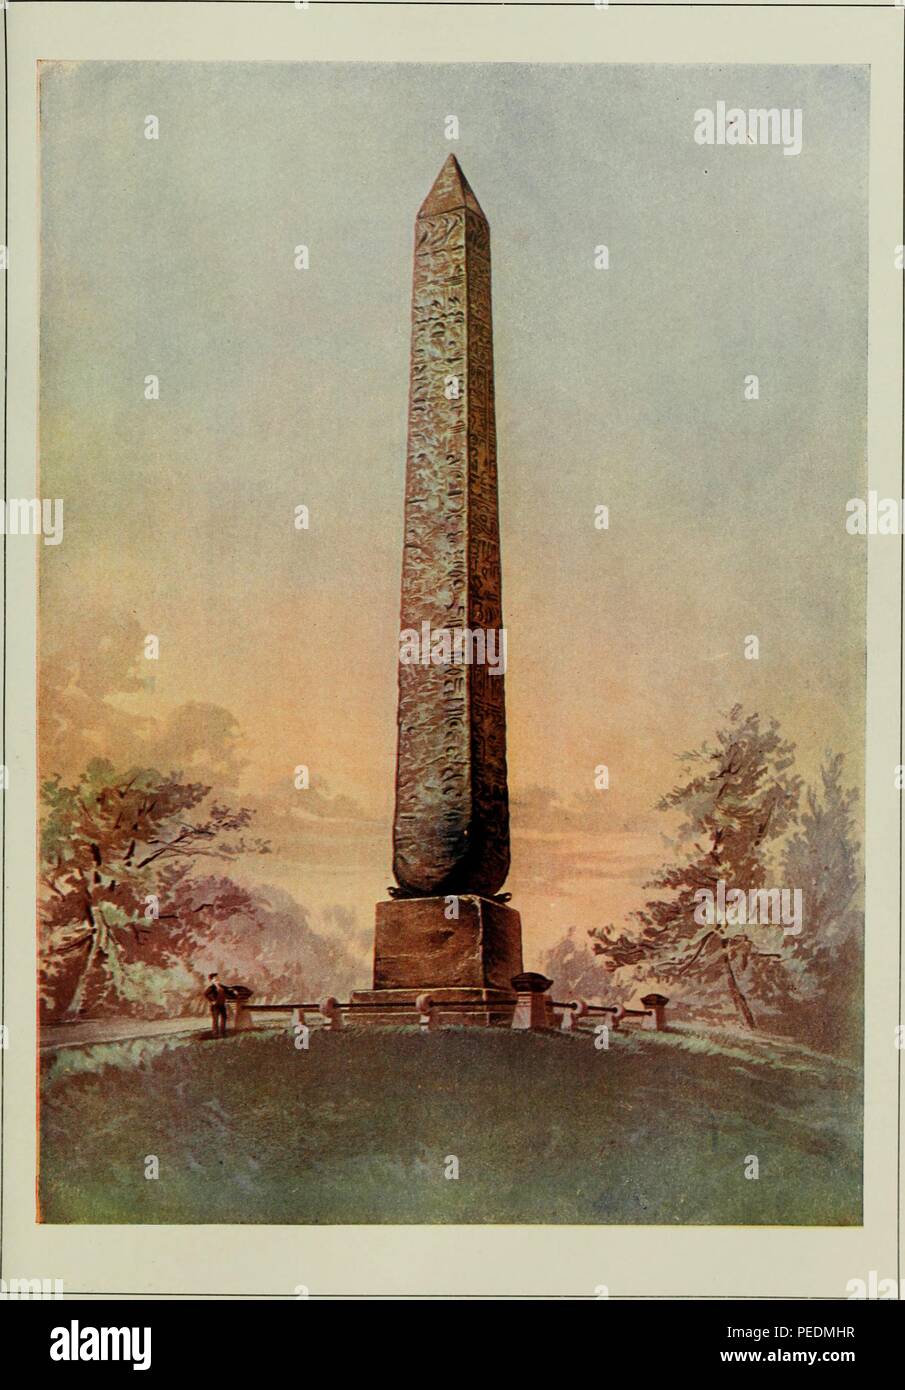 Color print illustrating Cleopatra's Needle in Central Park, New York, one of two 18th Dynasty obelisks, originally mounted near the Great Temple at Heliopolis in Egypt, which was gifted to the United States in 1877, 1903. Courtesy Internet Archive. () Stock Photo